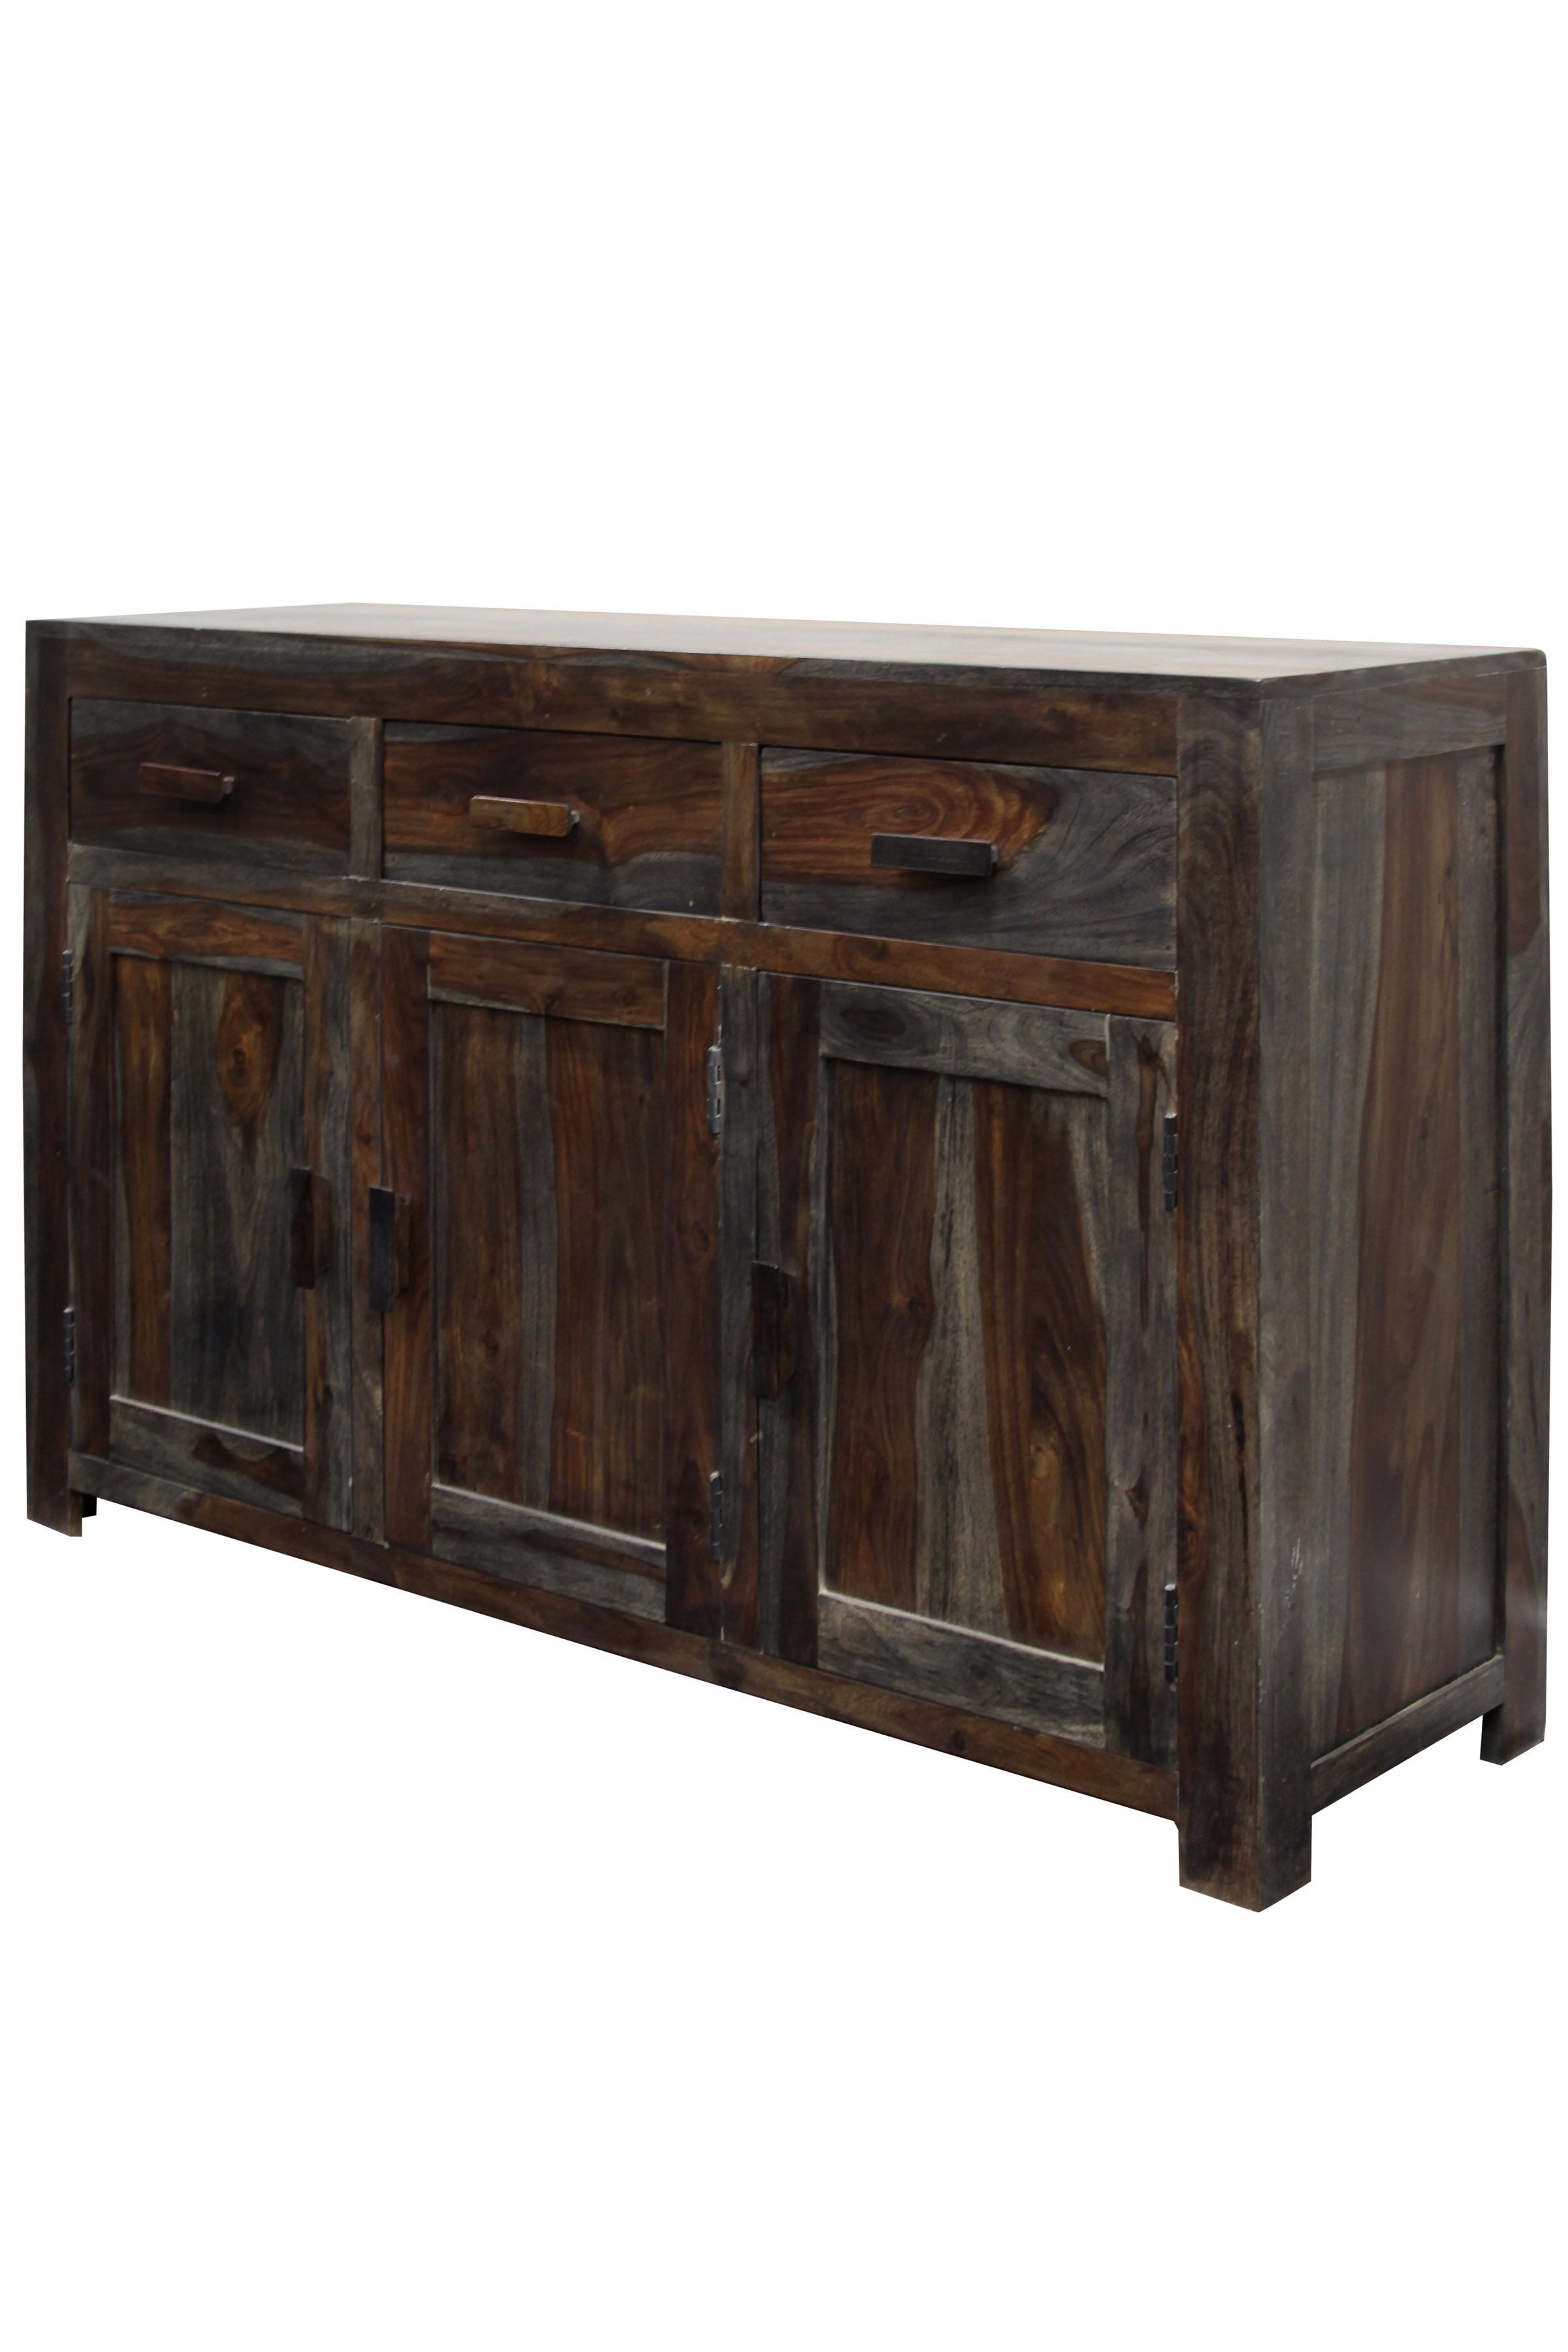 Loon Peak Sideboards & Buffets You'll Love In 2019 | Wayfair Within Most Up To Date Arminta Wood Sideboards (View 2 of 20)